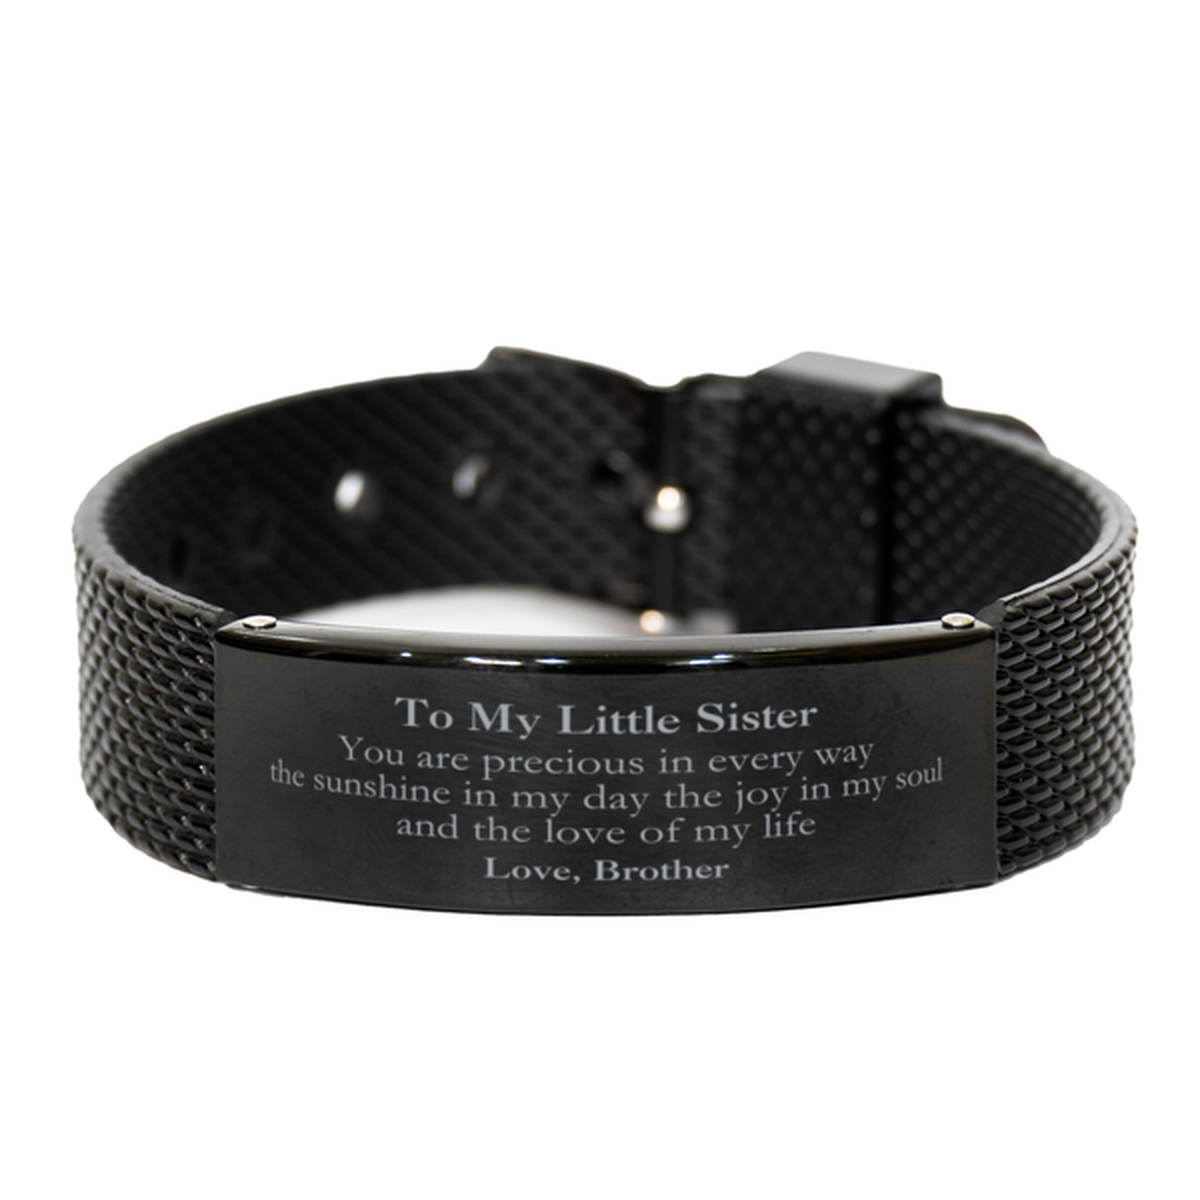 Graduation Gifts for Little Sister Black Shark Mesh Bracelet Present from Brother, Christmas Little Sister Birthday Gifts Little Sister You are precious in every way the sunshine in my day. Love, Brother